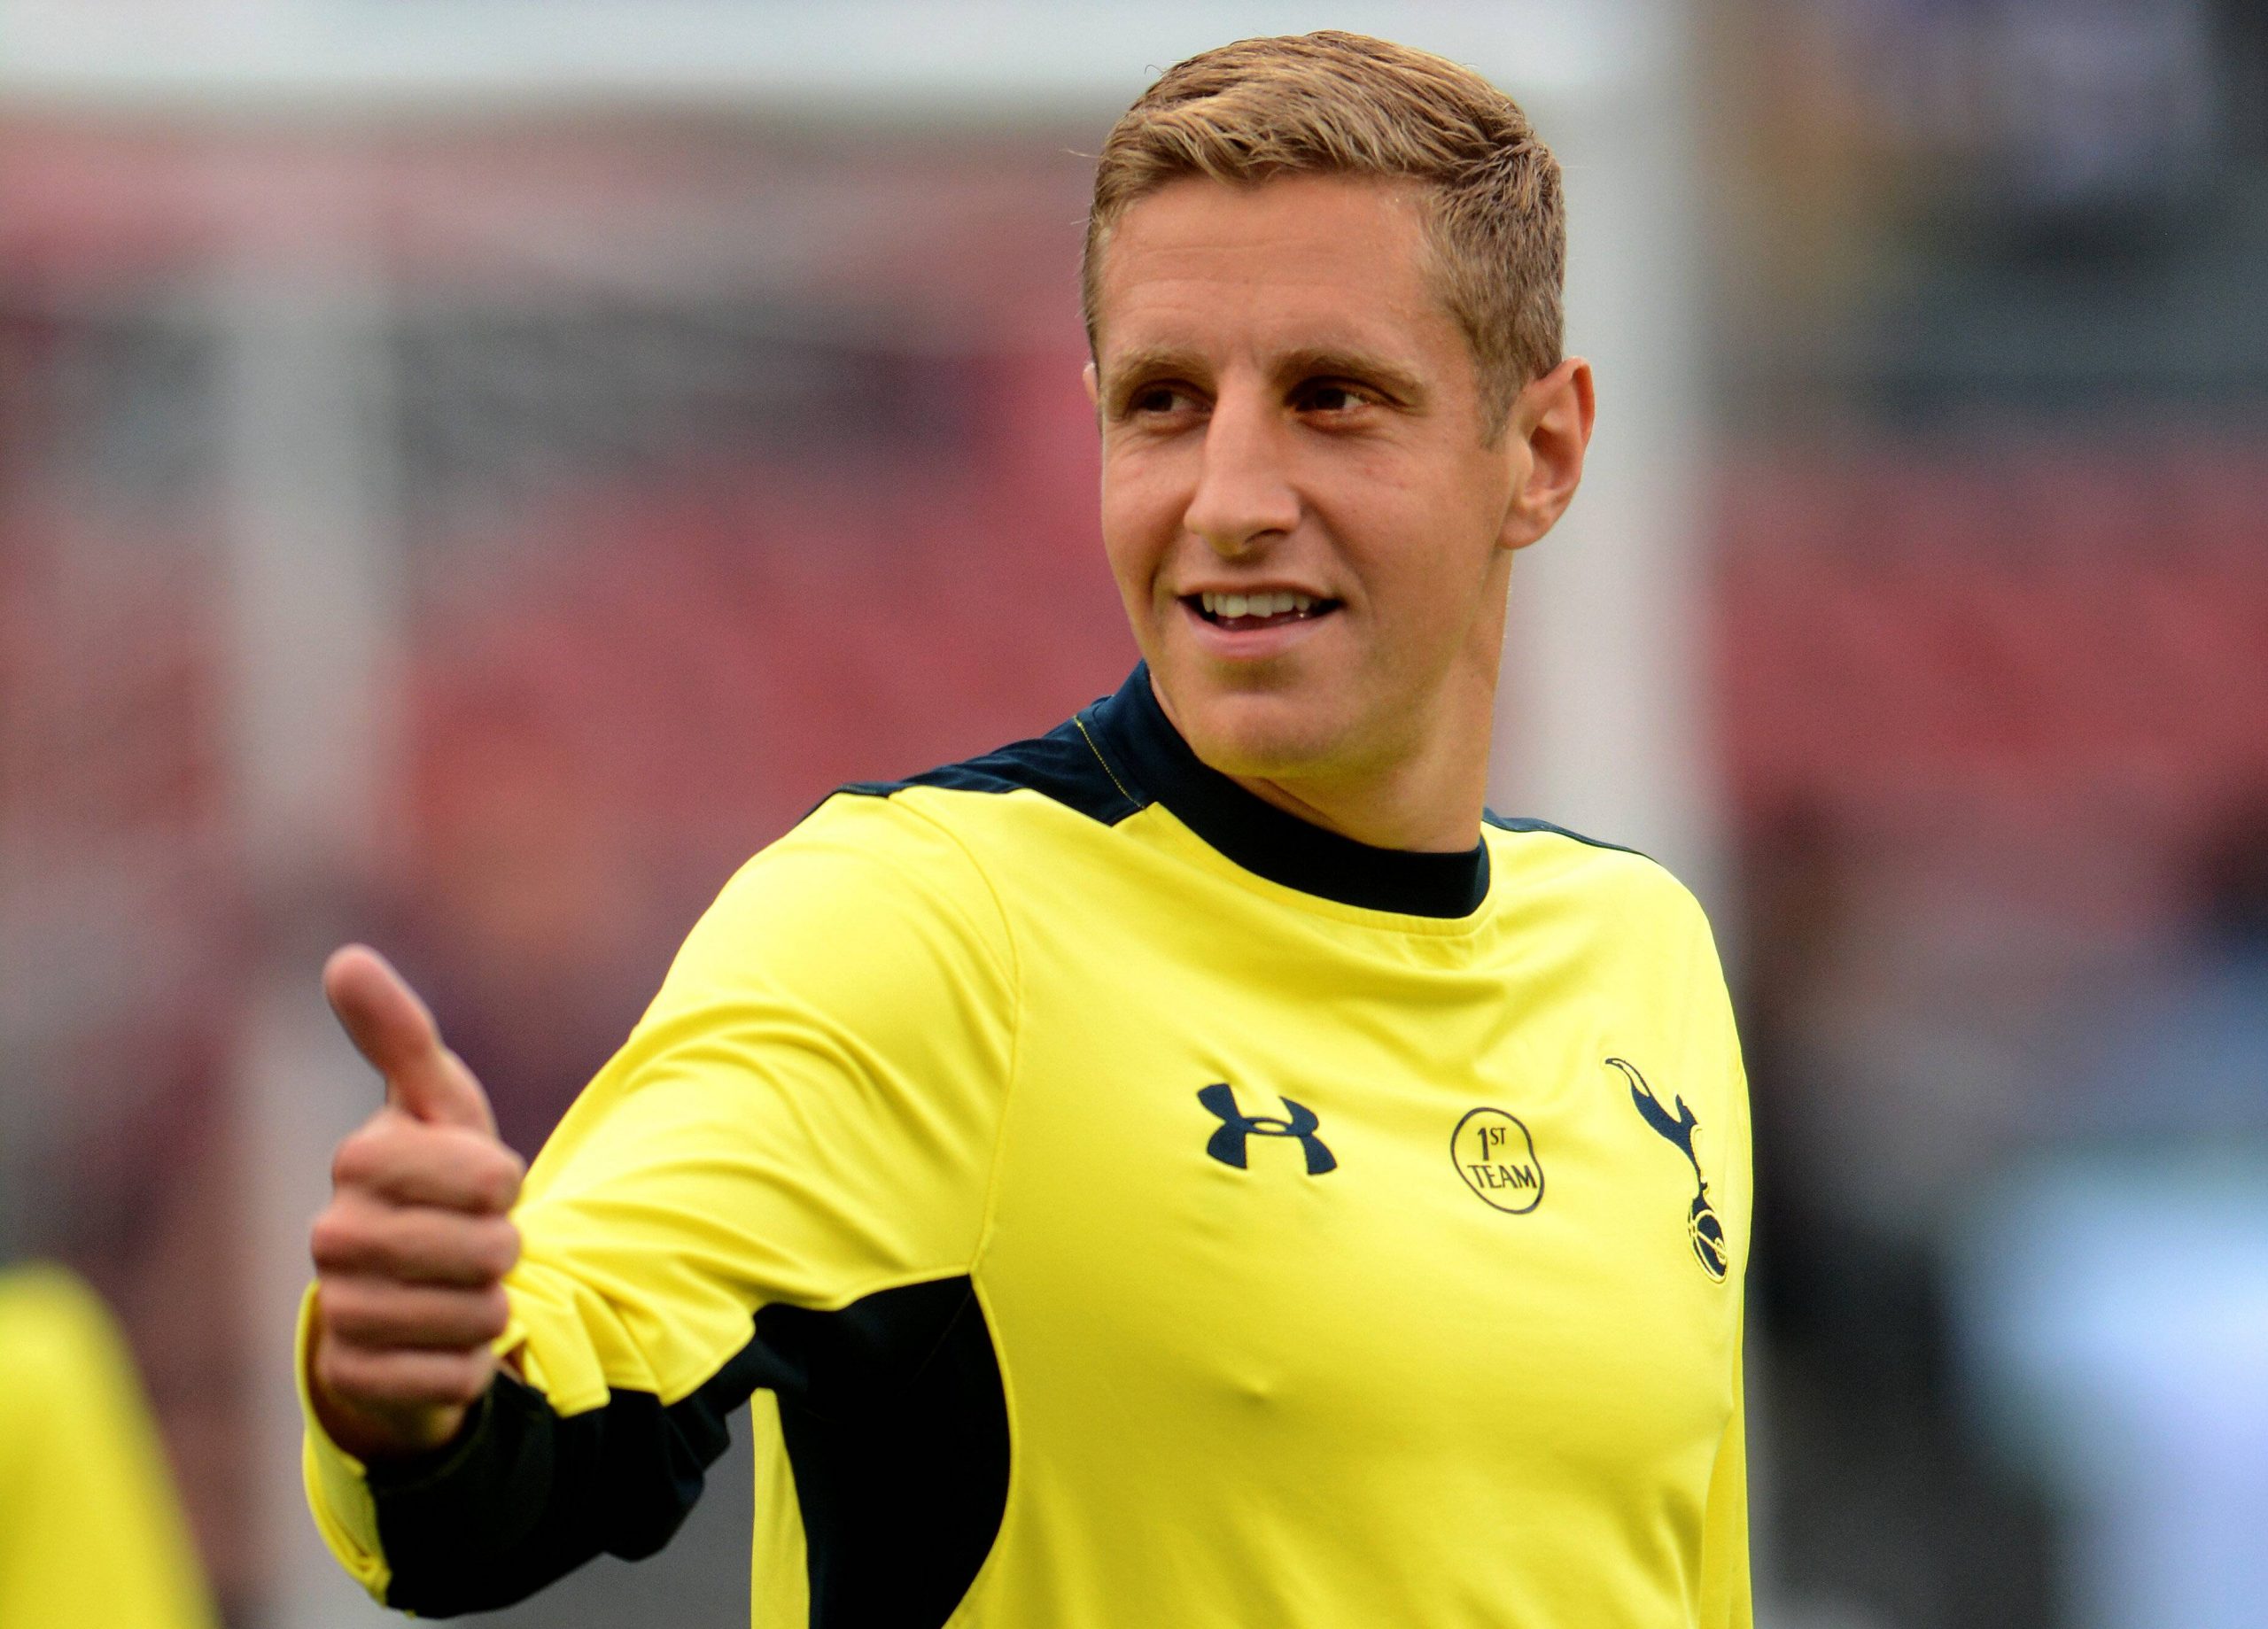 Tottenham Hotspur defender, Michael Dawson, in action during his playing days.